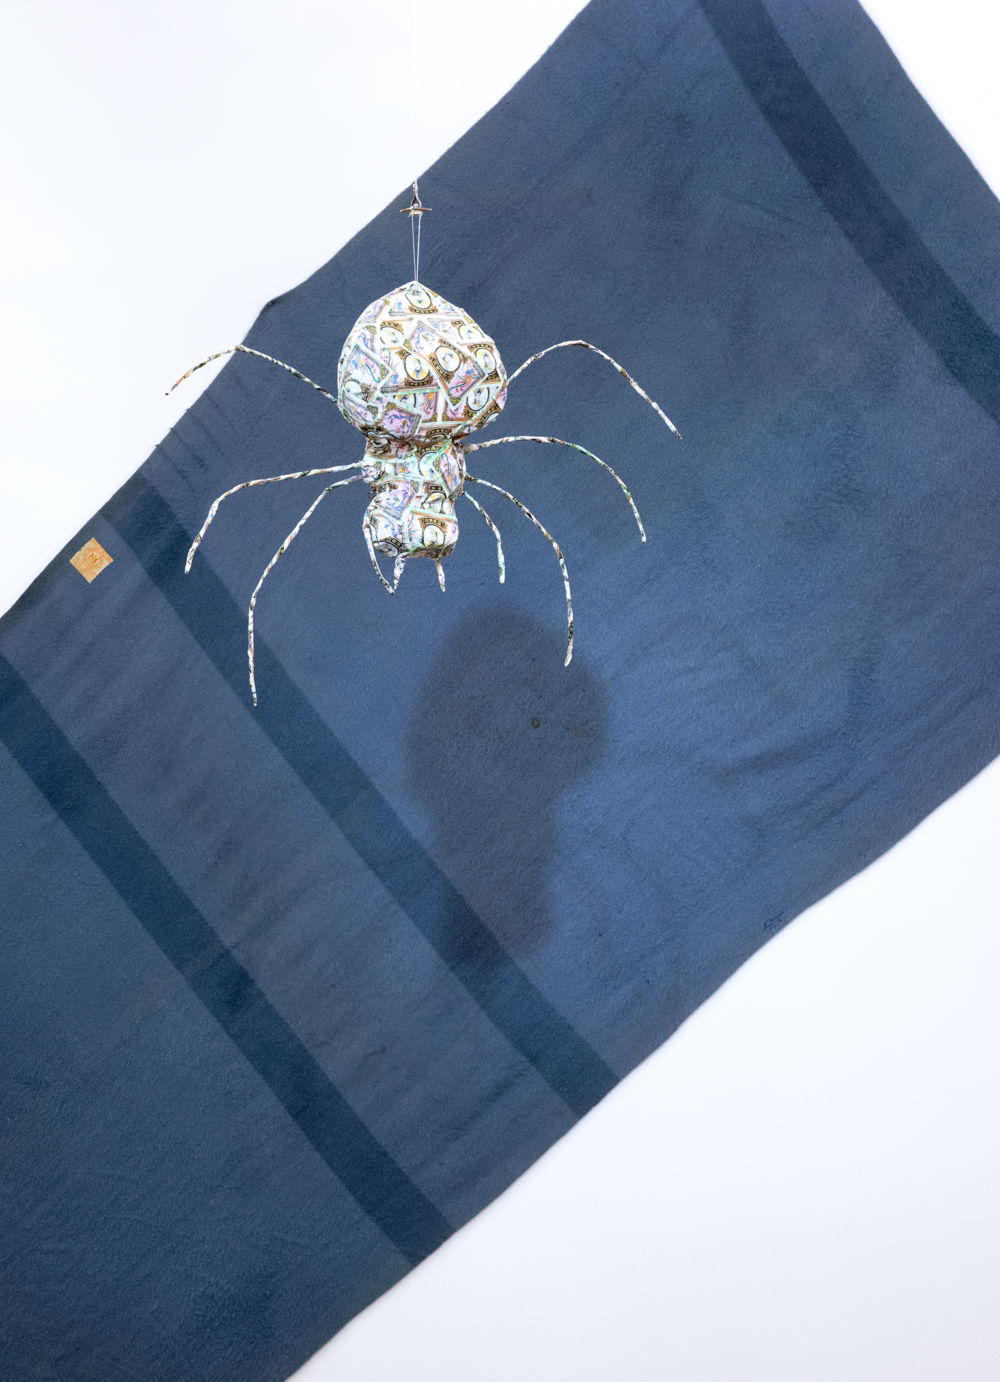 ​Jerry Pethick, Bigger than a book, Wilder than a Tree (detail), 1994–1997, found book Irish Giant, paint, graphite on linen, styrofoam, cibachrome photograph, wool blanket, spotlight, papier-mâché, metal spider, dimensions variable​ by 